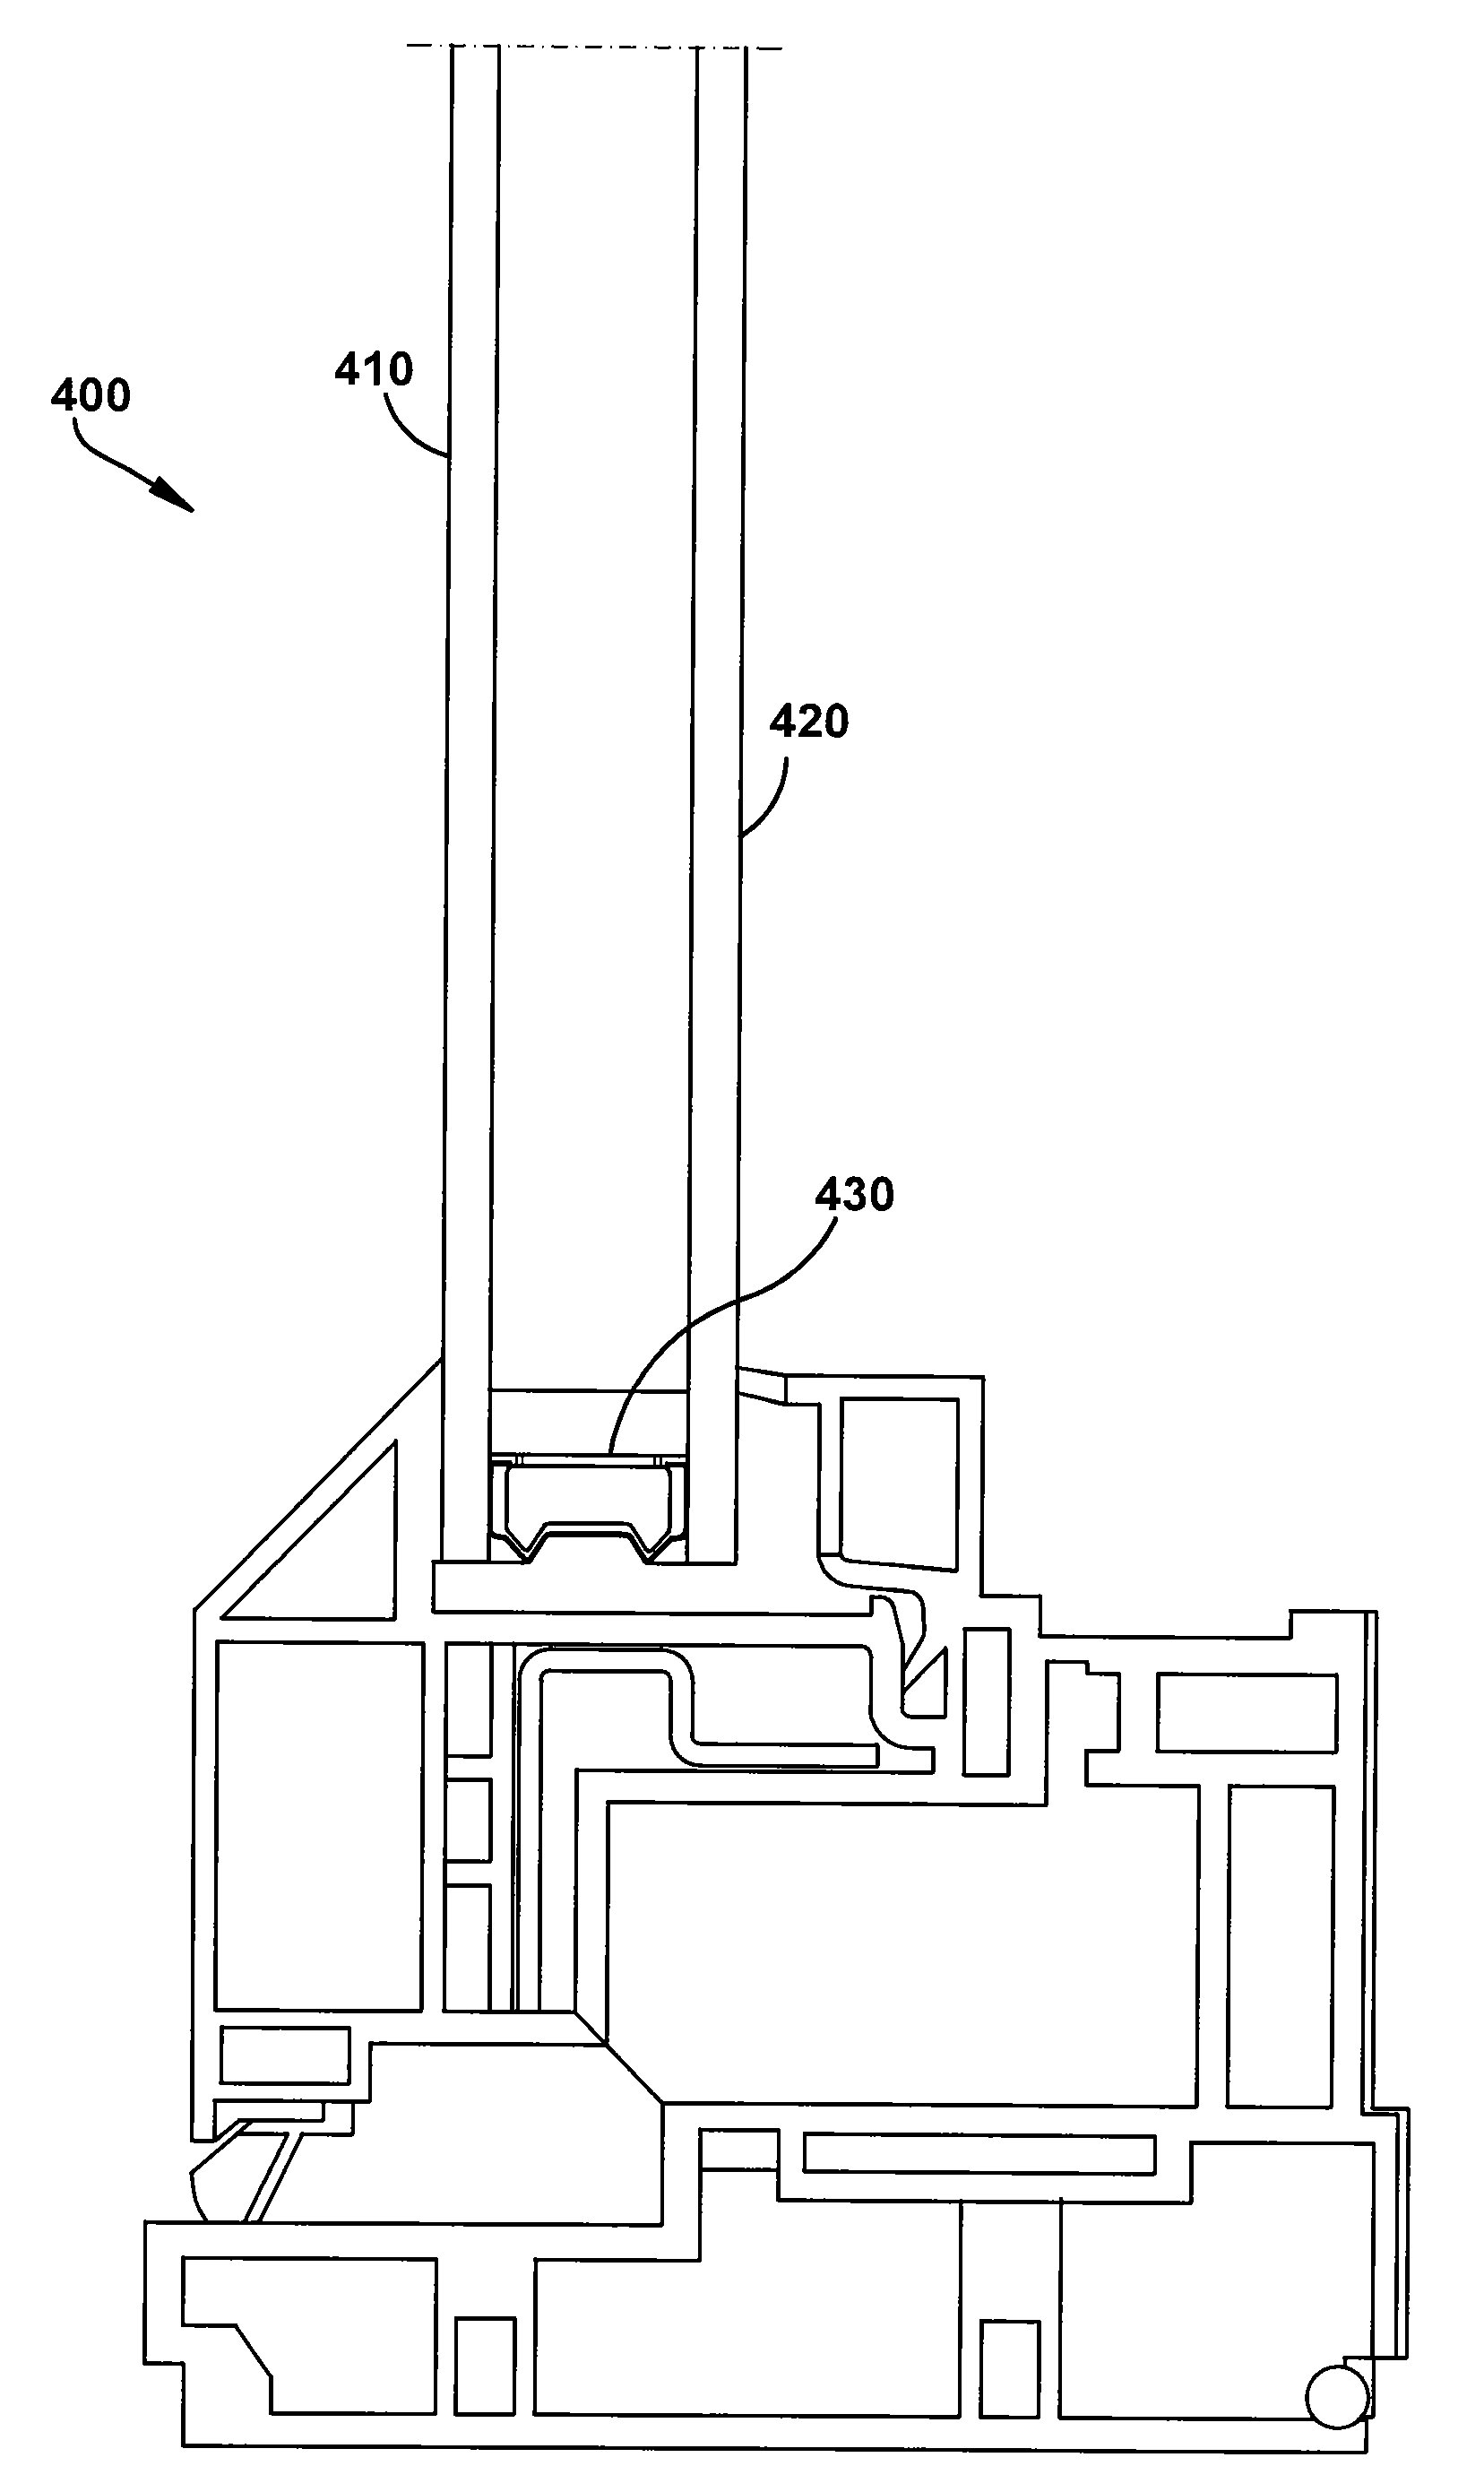 Composite spacer bar for reducing heat transfer from a warm side to a cold side along an edge of an insulated glazing unit